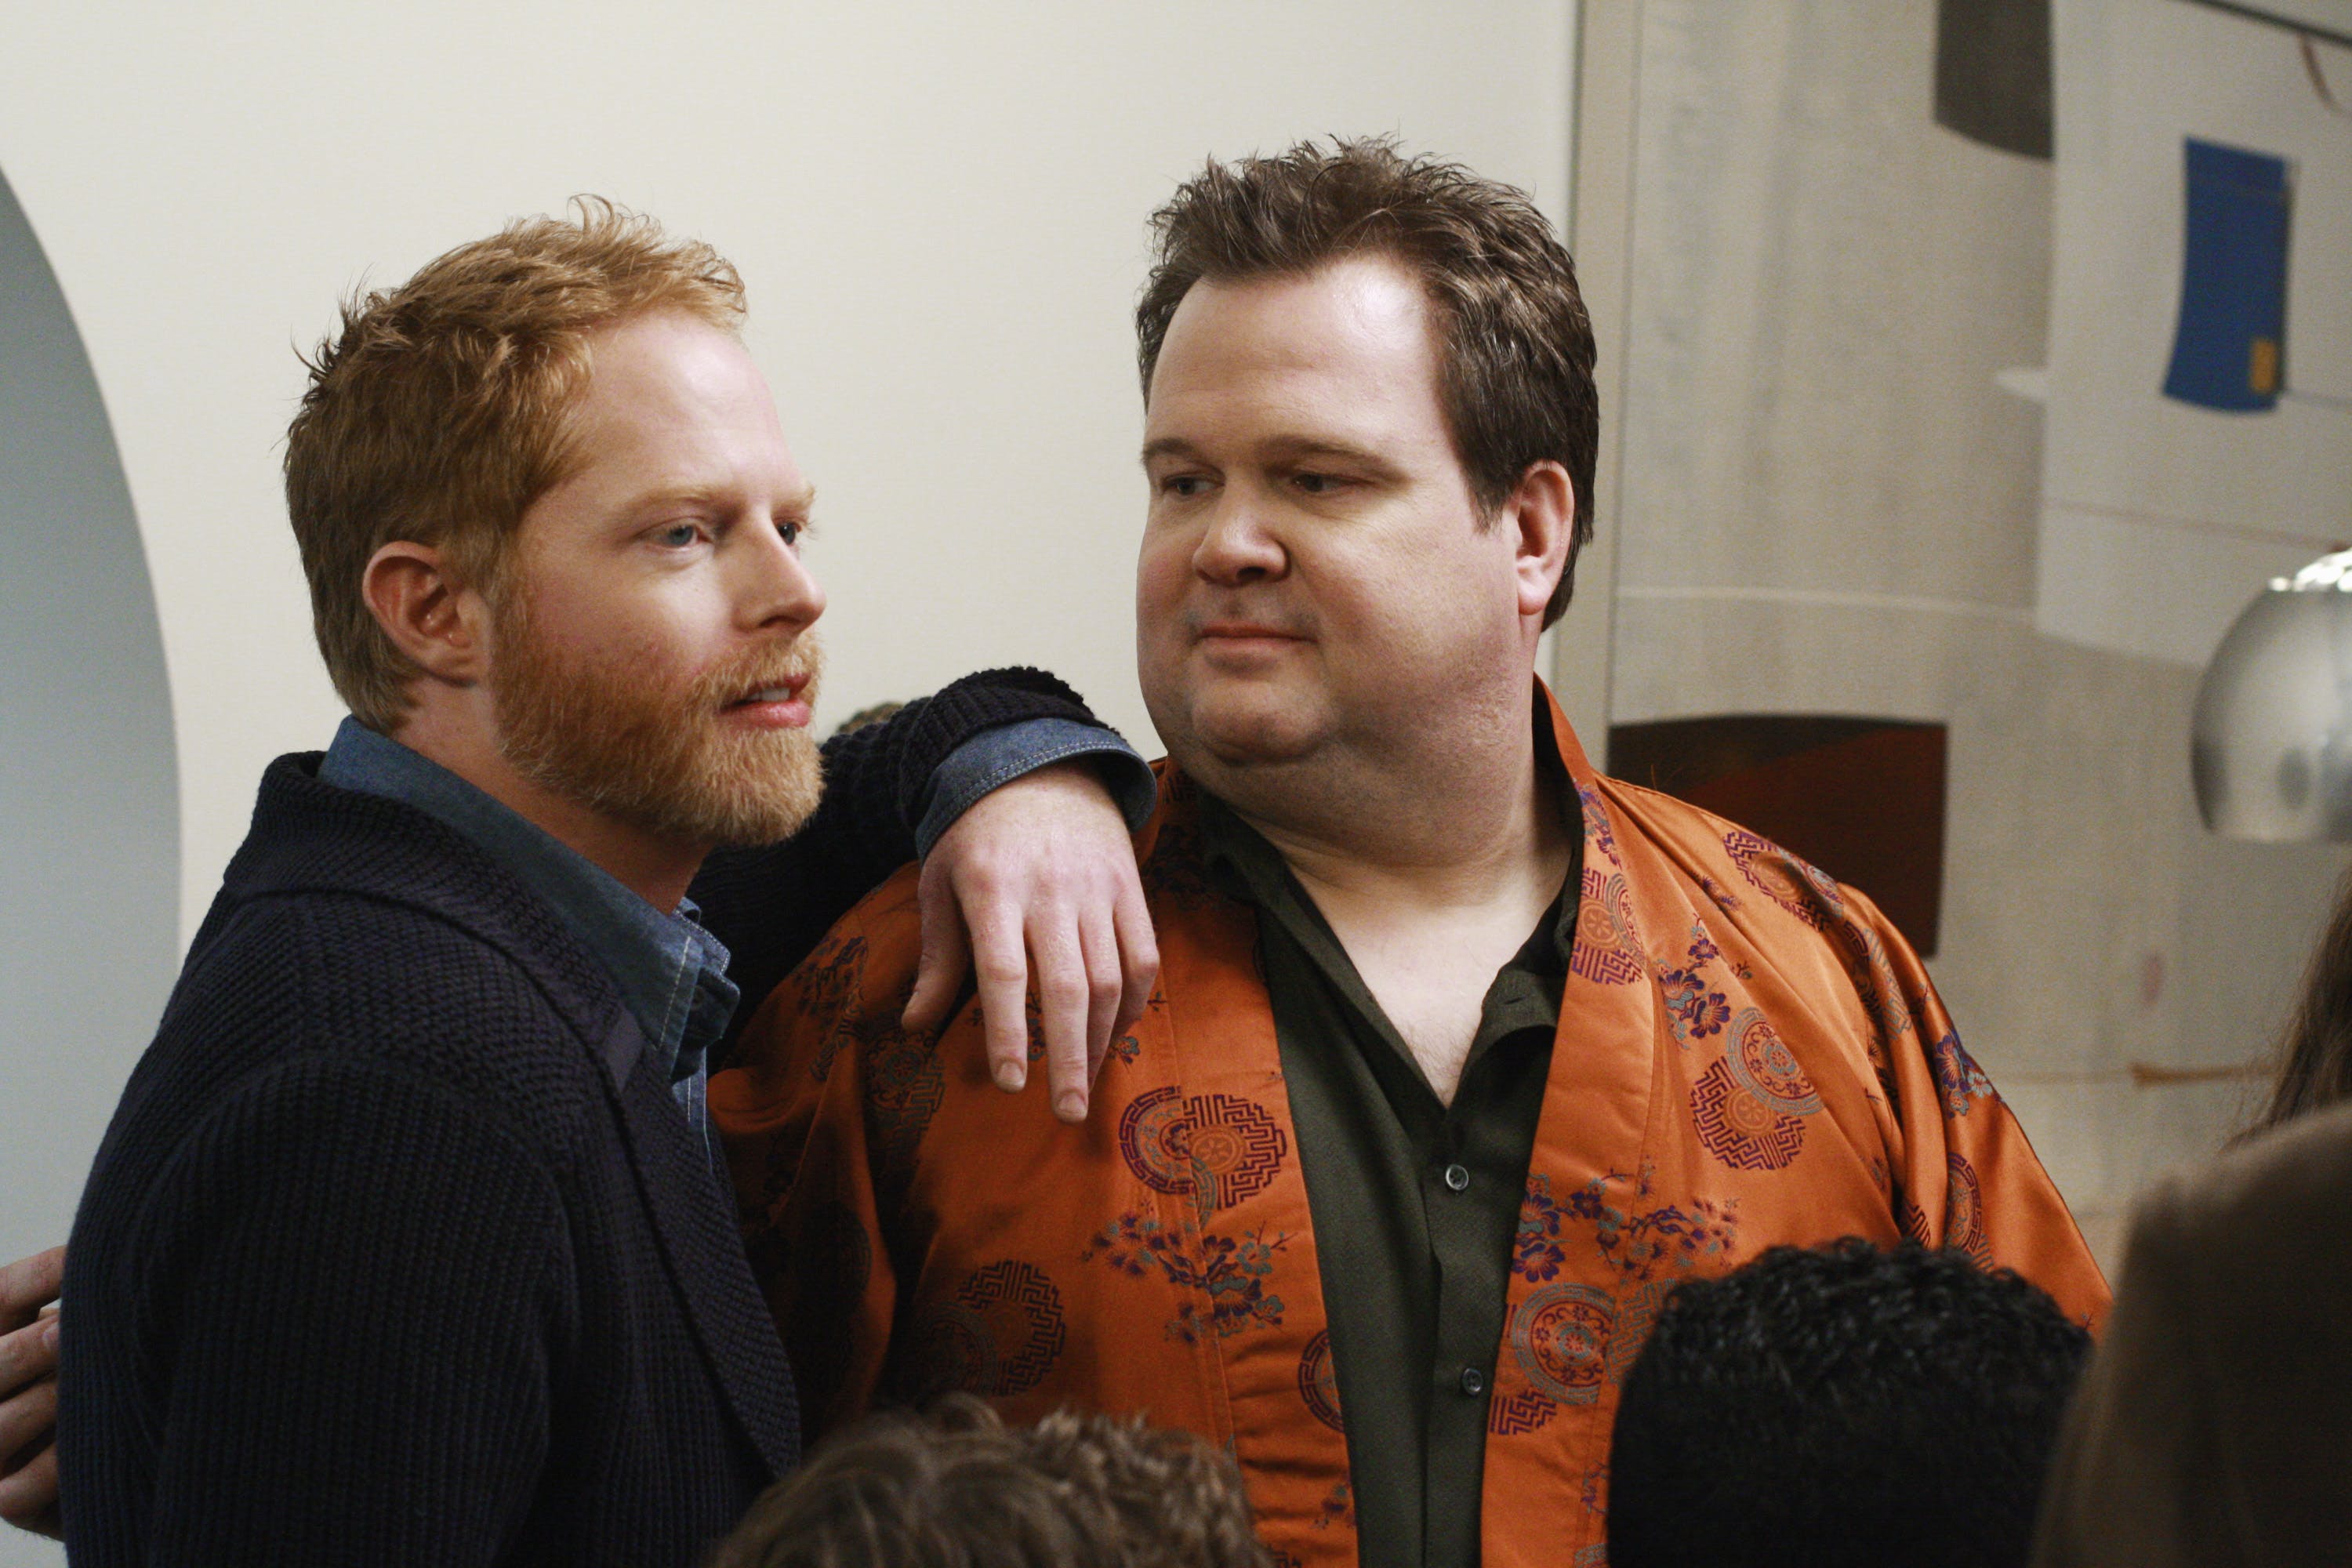 Eric Stonestreet And Jesse Tyler Ferguson. Eric Stonestreet and Jesse Tyler Ferguson are one of the reasons why Modern Family became such a popular show a few years ago. Despite the fact that Eric isn’t gay in real-life, the two manage to make their marriage look believable on-screen.

Following the first season of the show, fans noticed that Eric and Jesse were married on the show but had never actually kissed on-screen. It was said to have been because Eric was straight in real-life and he wasn’t prepared to kiss a man on-screen for the first season. It seems that Eric was finally able to get over this and the couple later went on to share a number of on-screen kisses.